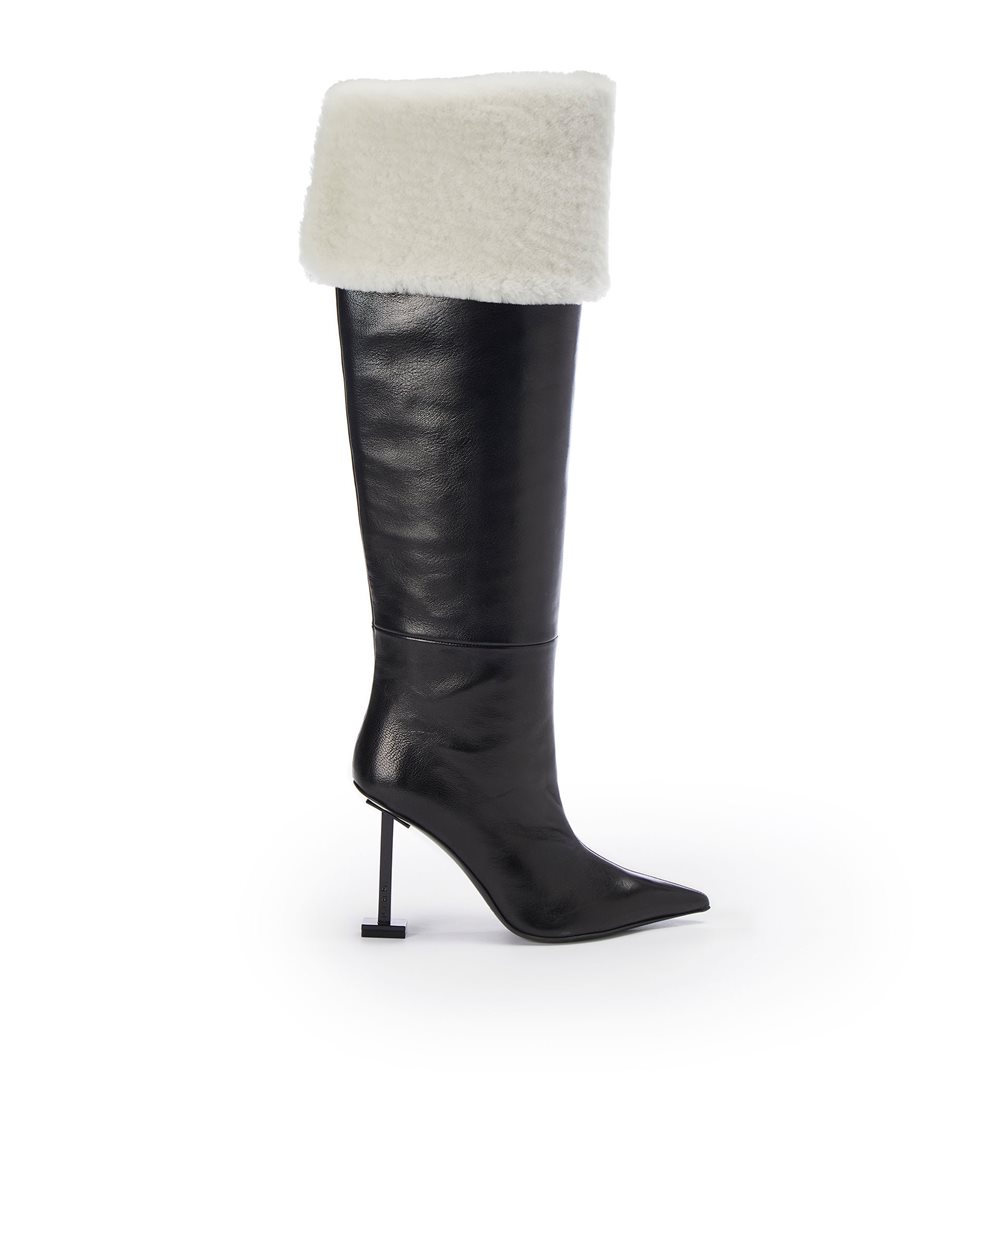 Leather boots with heels - carosello HP woman accessories | Iceberg - Official Website